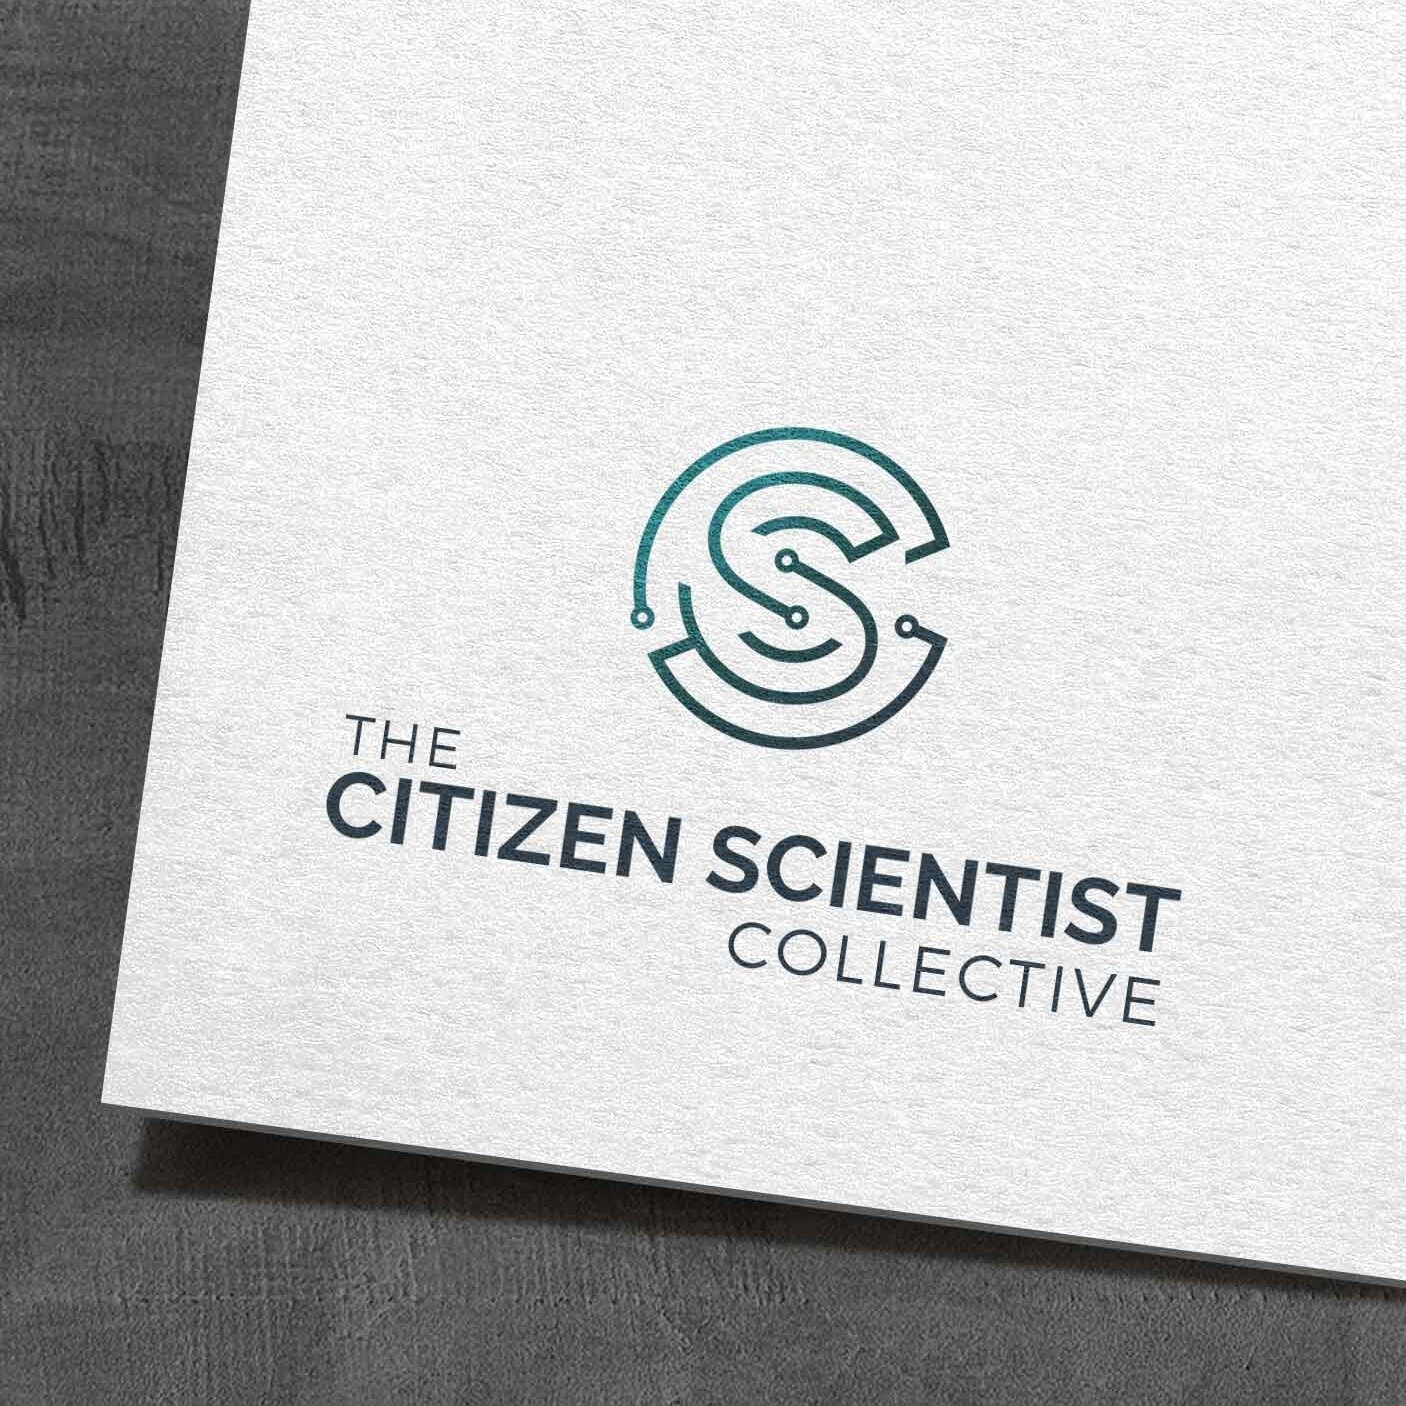 The Citizen Scientist Collective | Branding + Logo Design

If you&rsquo;re looking for a bold, clear vision of what your brand will look like, we can help.

Let's get to work on bringing your vision to life. 
Book your consultation to get started!